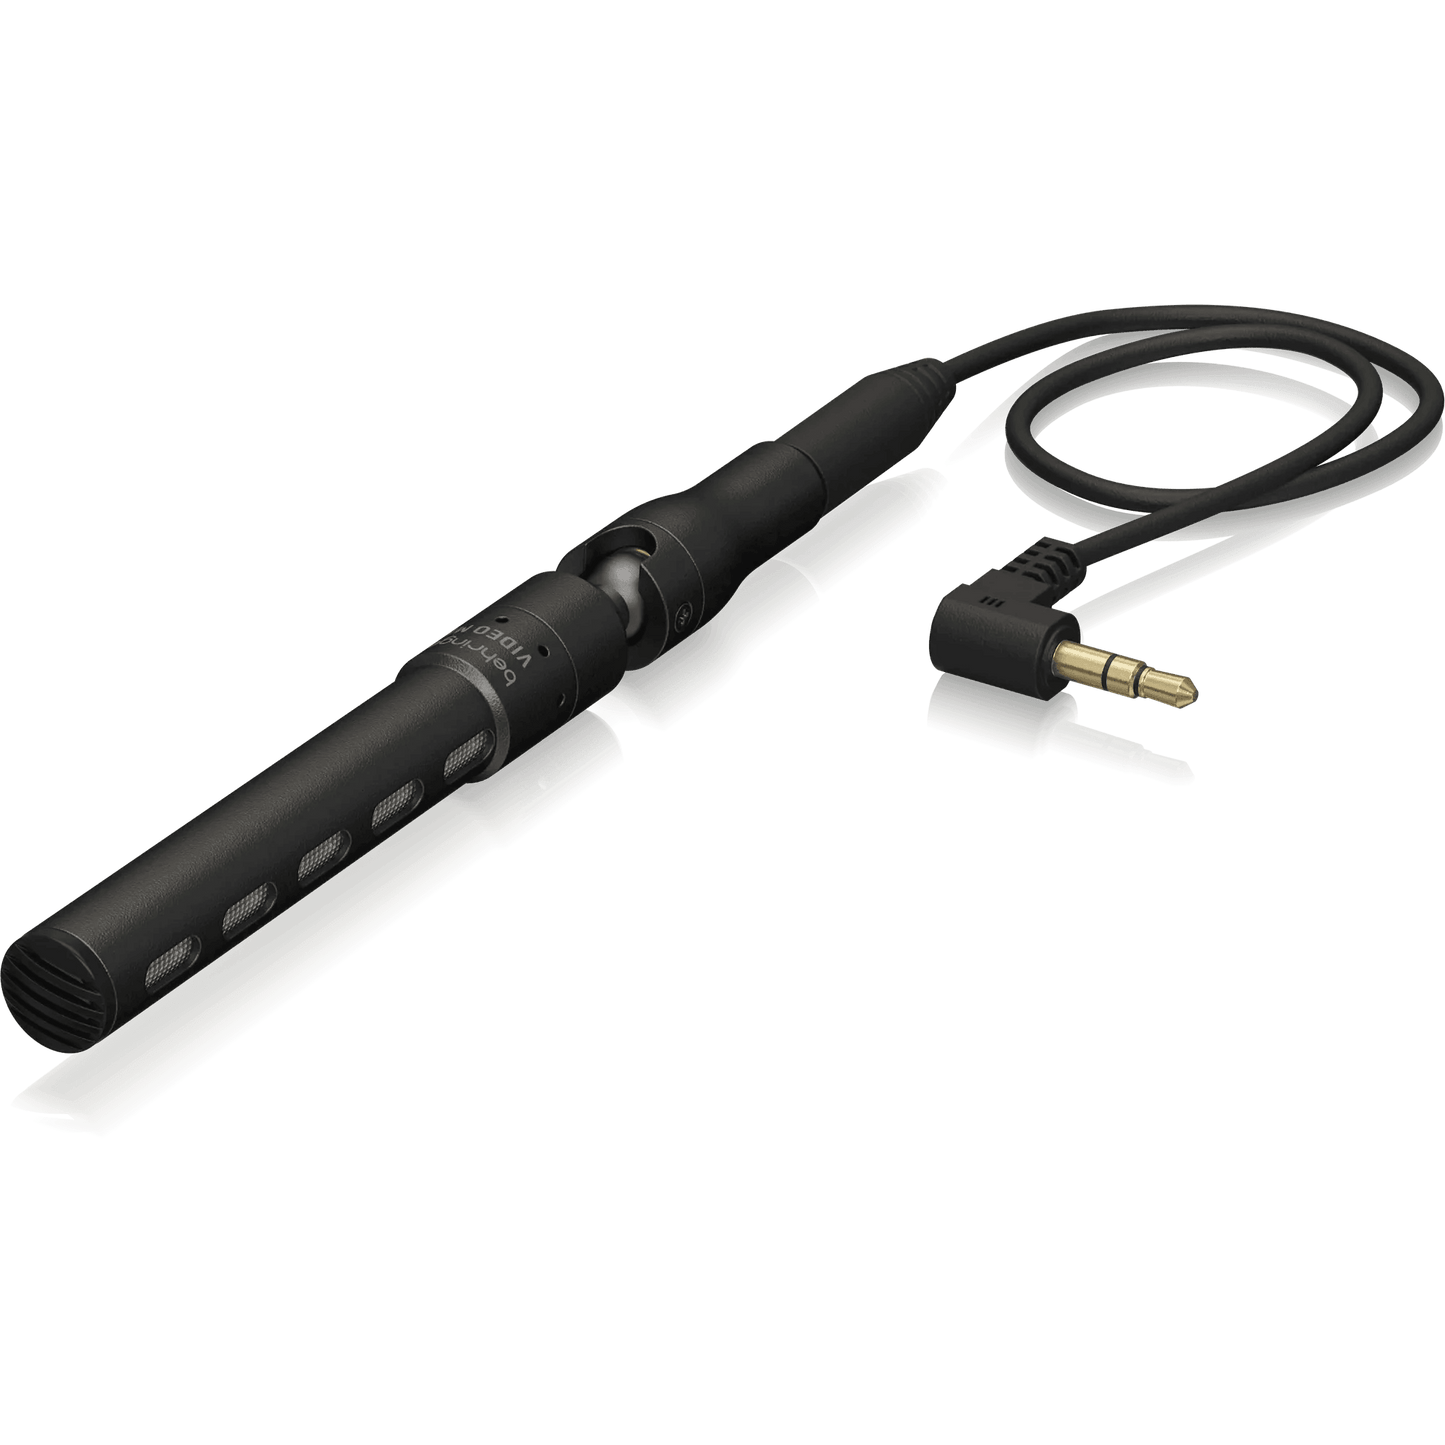 Behringer Video Mic Condenser Microphone for Video Camera Applications